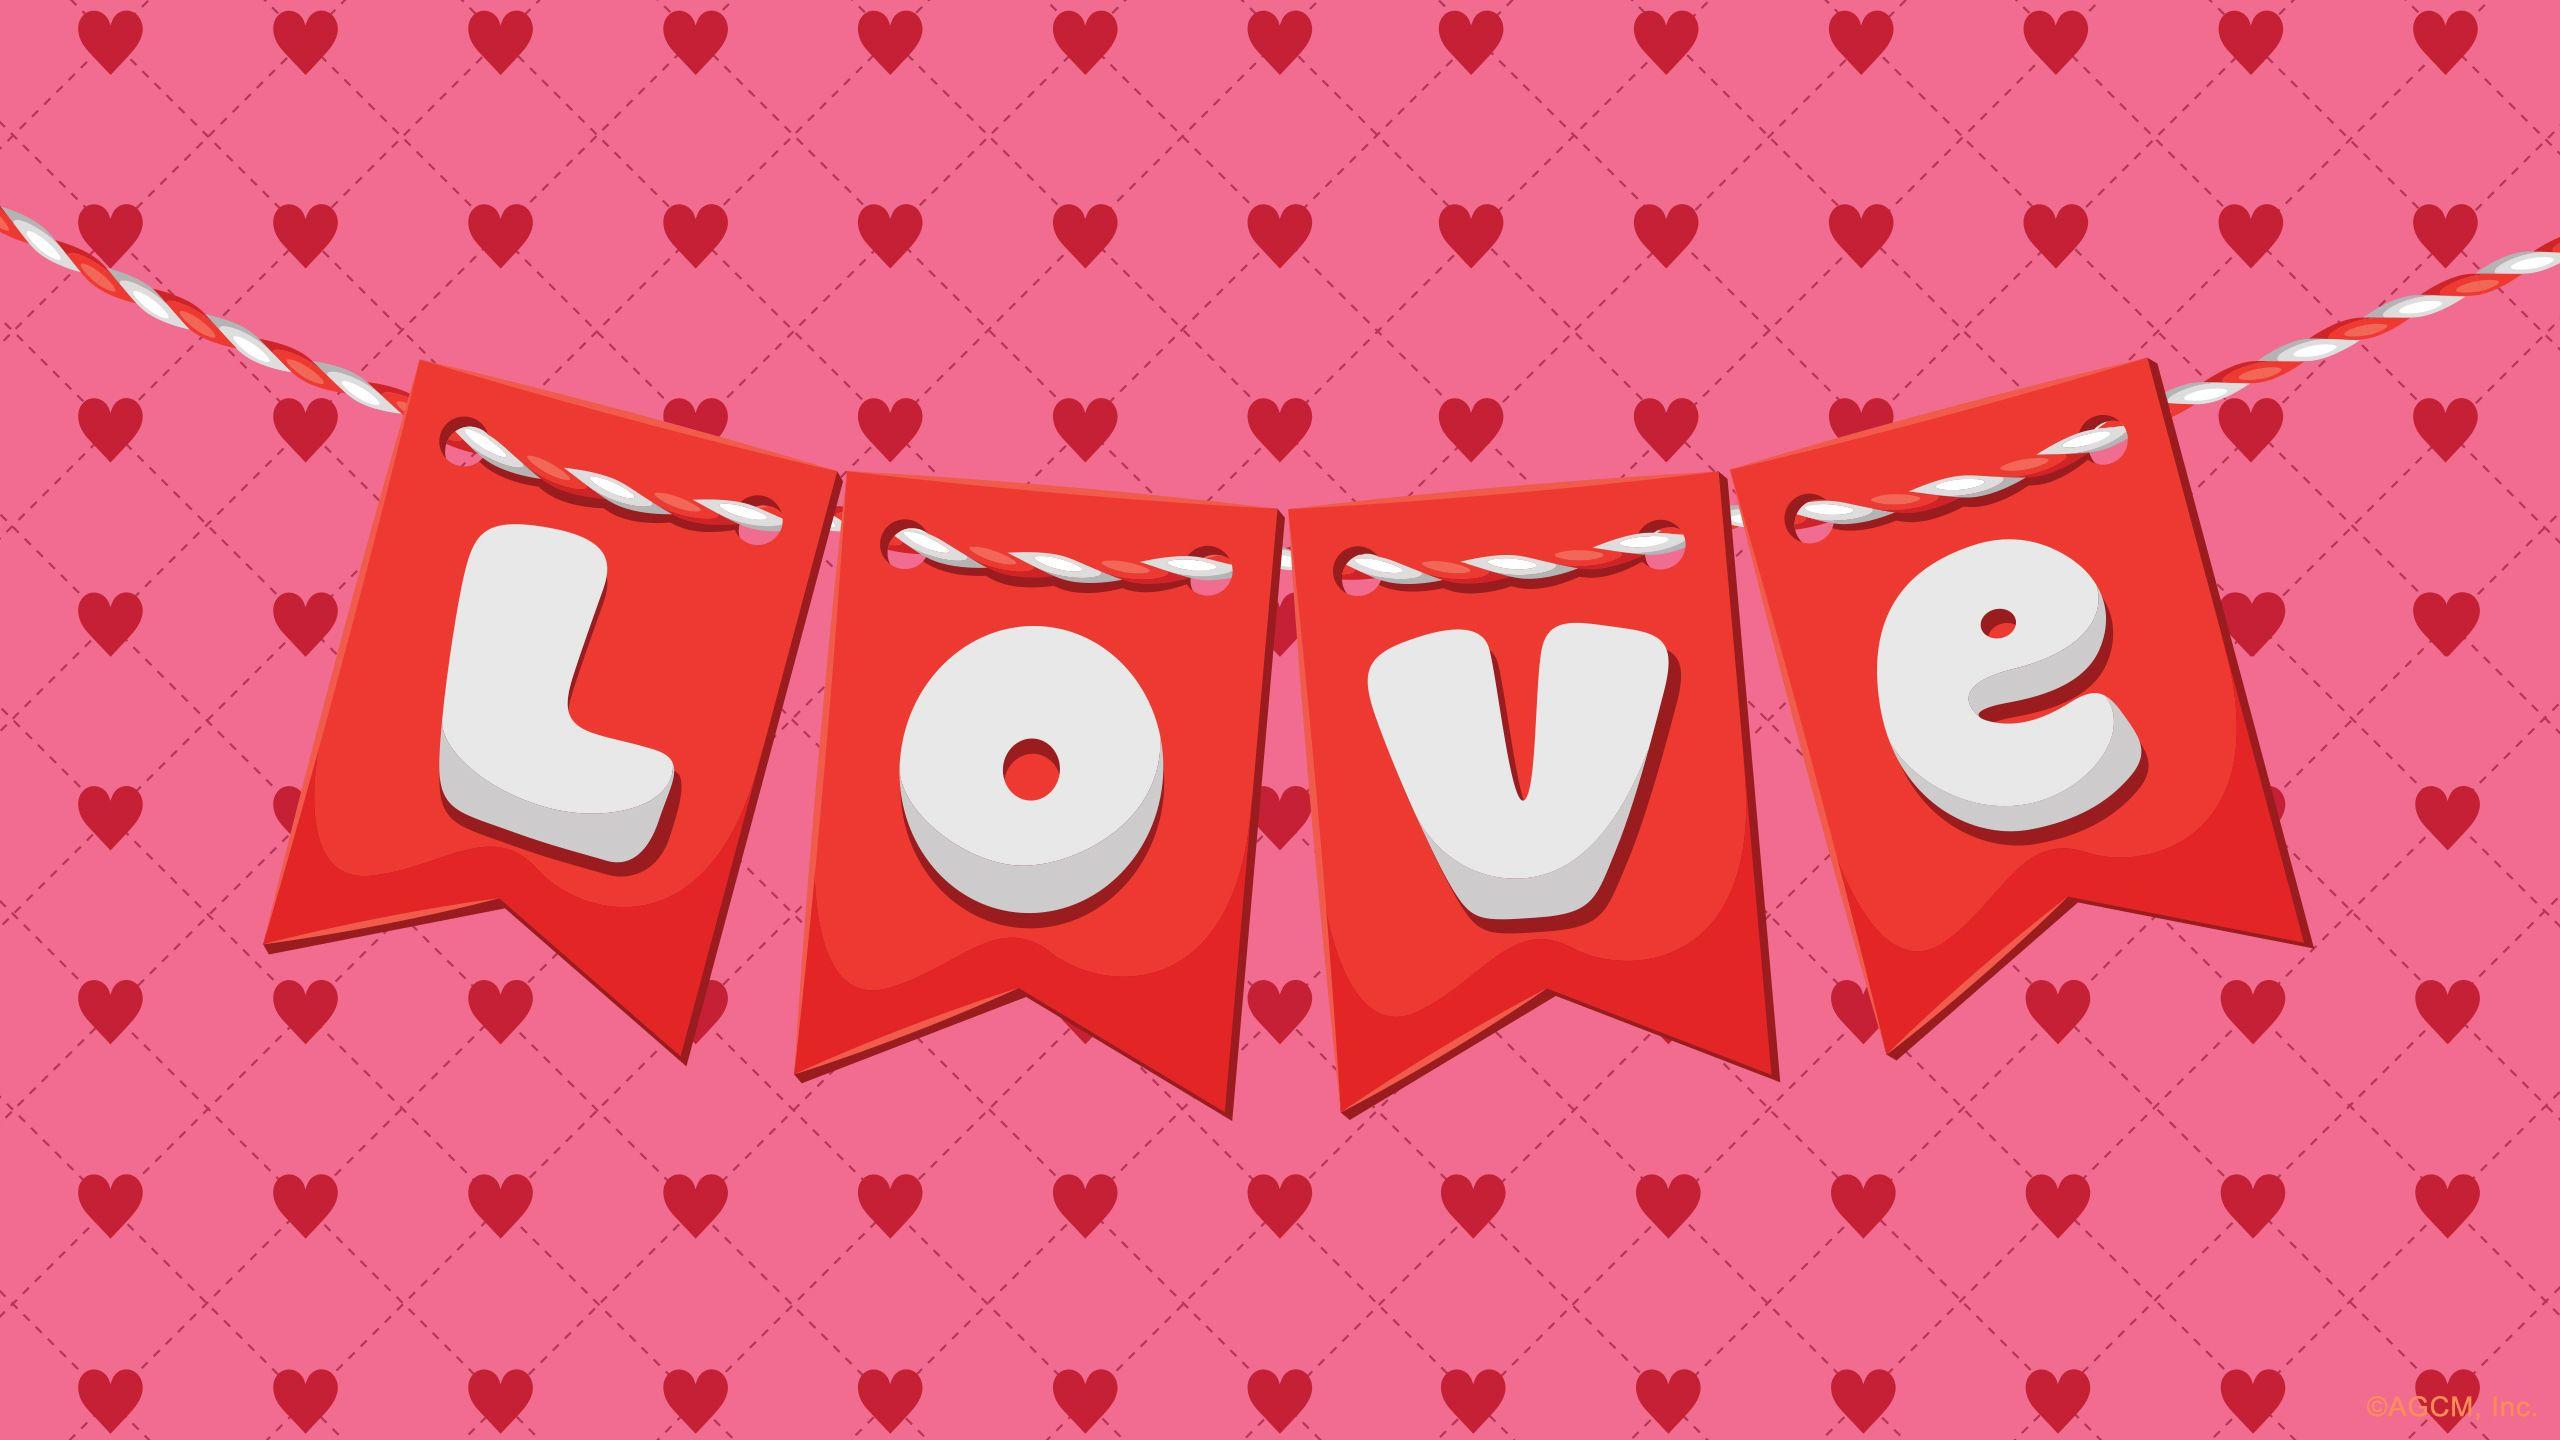 Valentines Day Wallpapers For Your Desktop 71 images